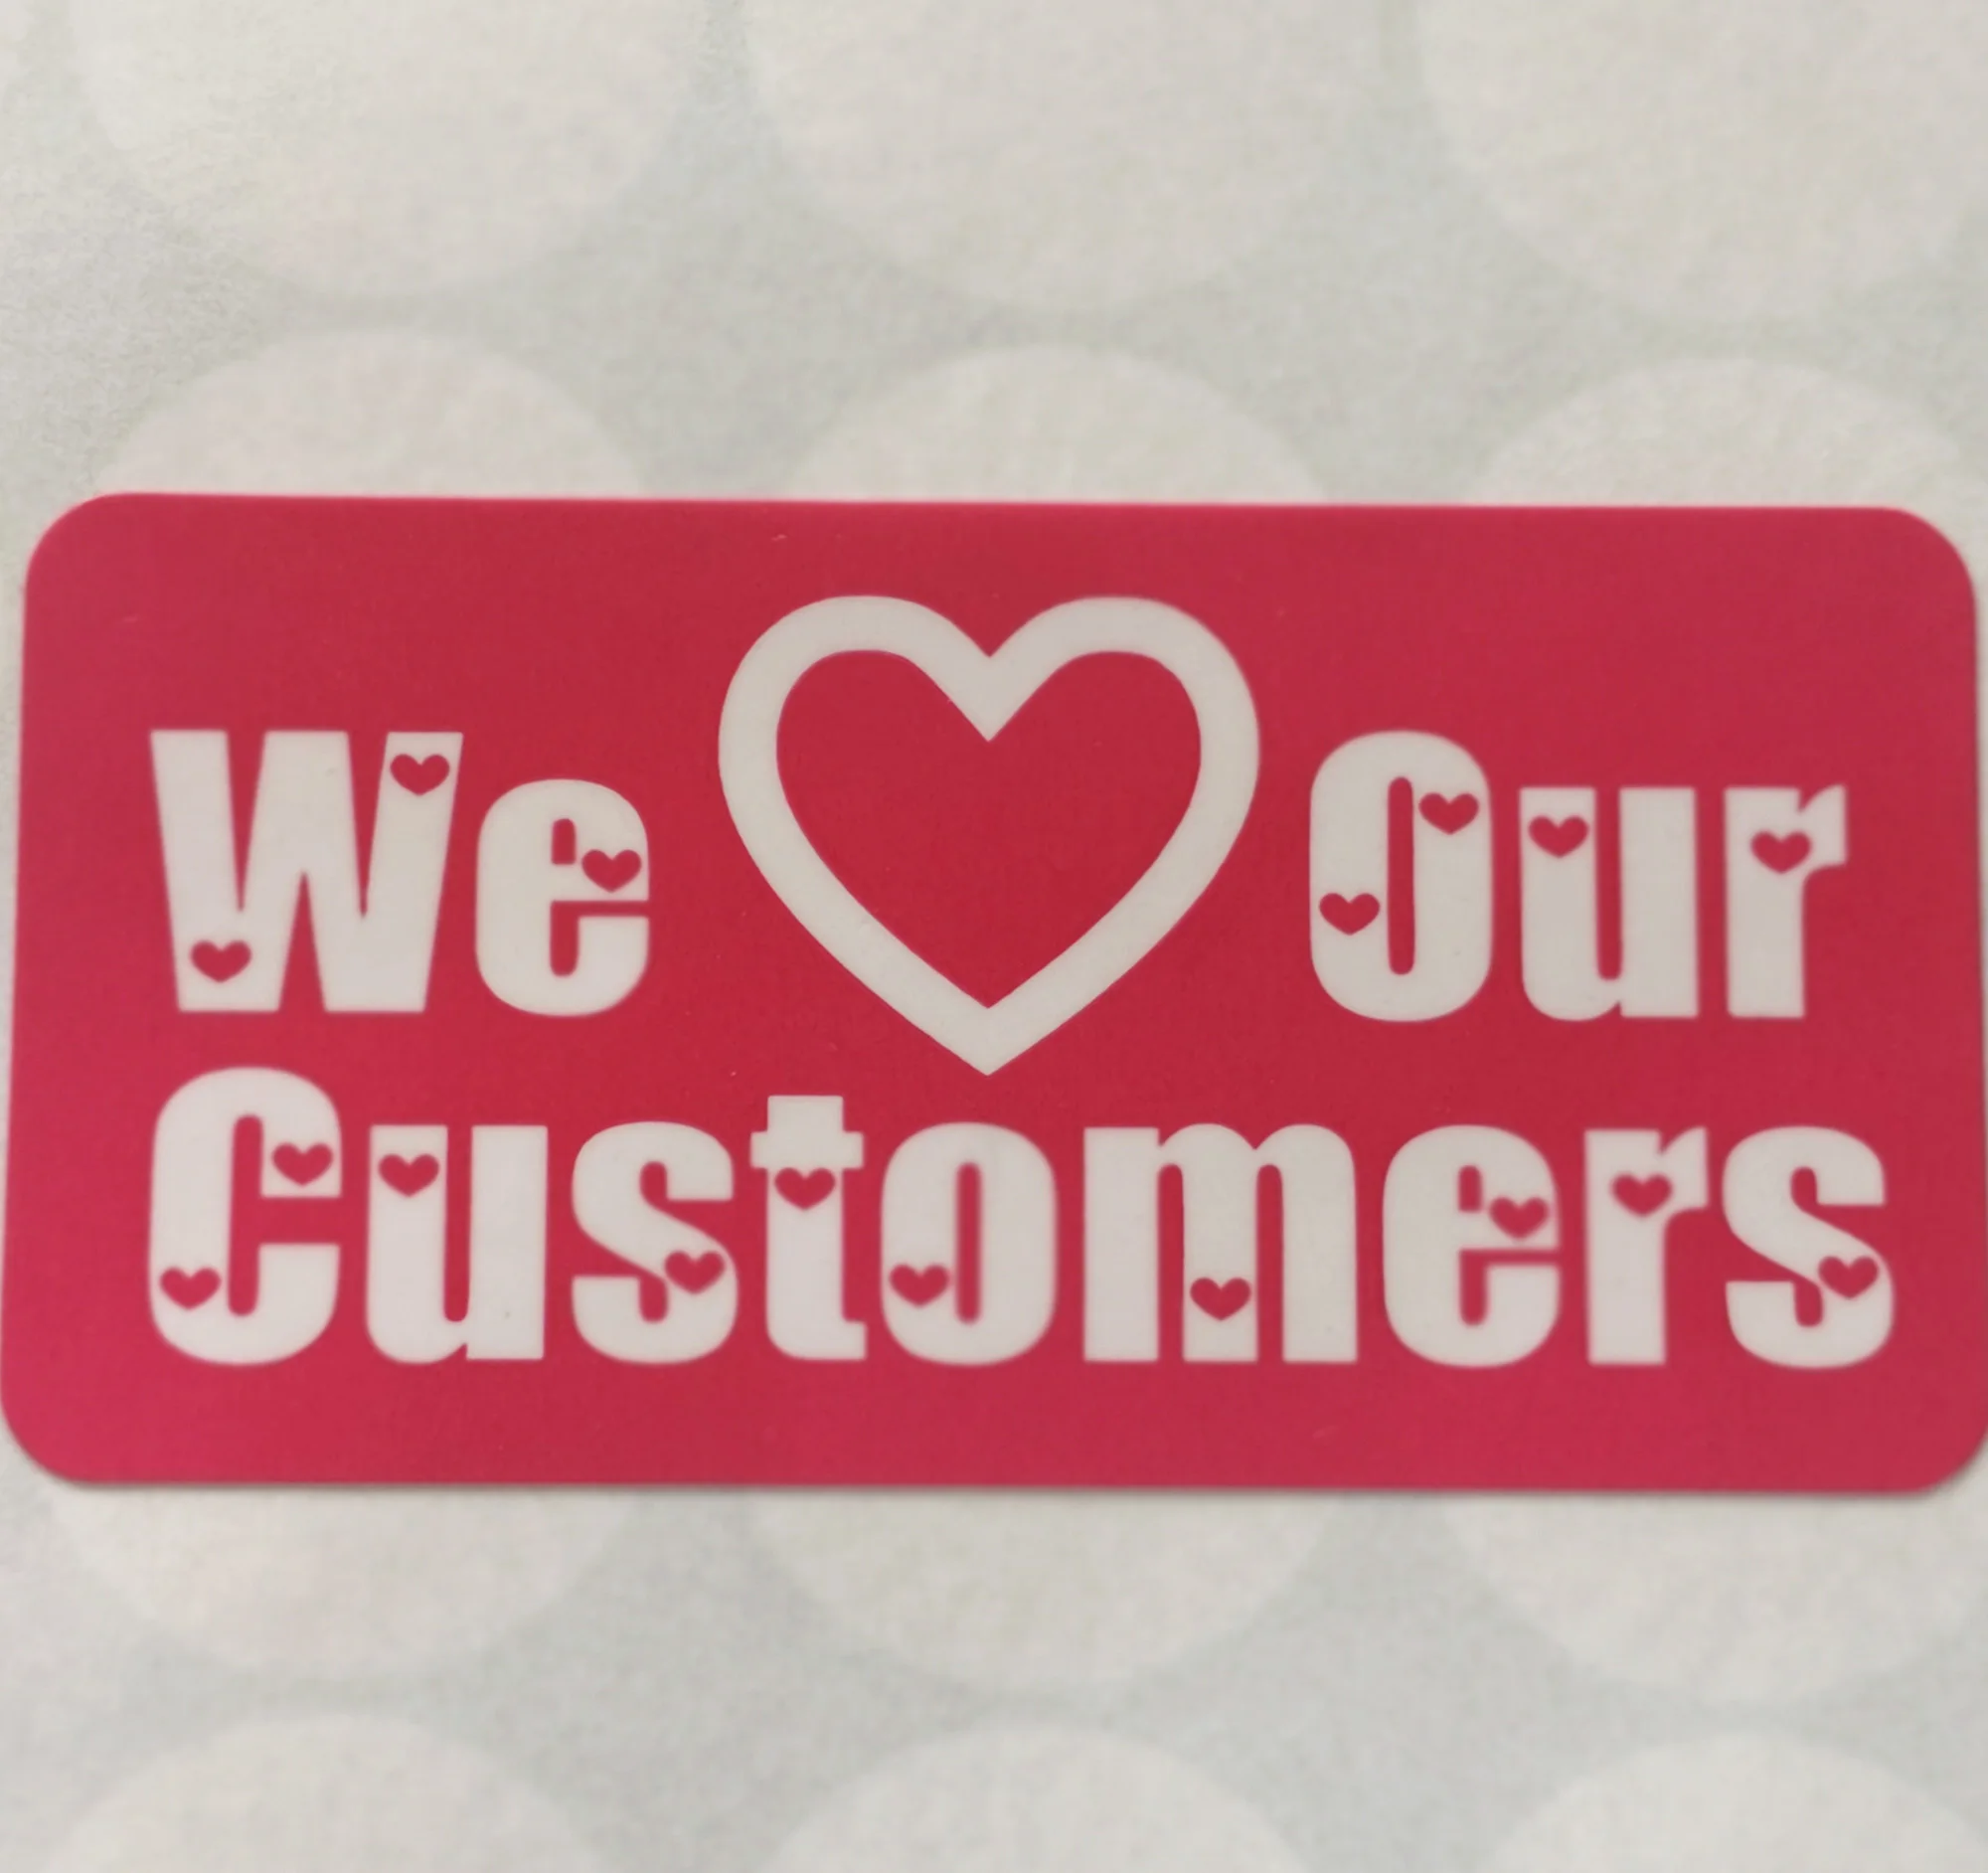 300pcs/lot 6x3cm WE LOVE OUR CUSTOMERS Self-adhesive label sticker for customers service, Item No.SL17